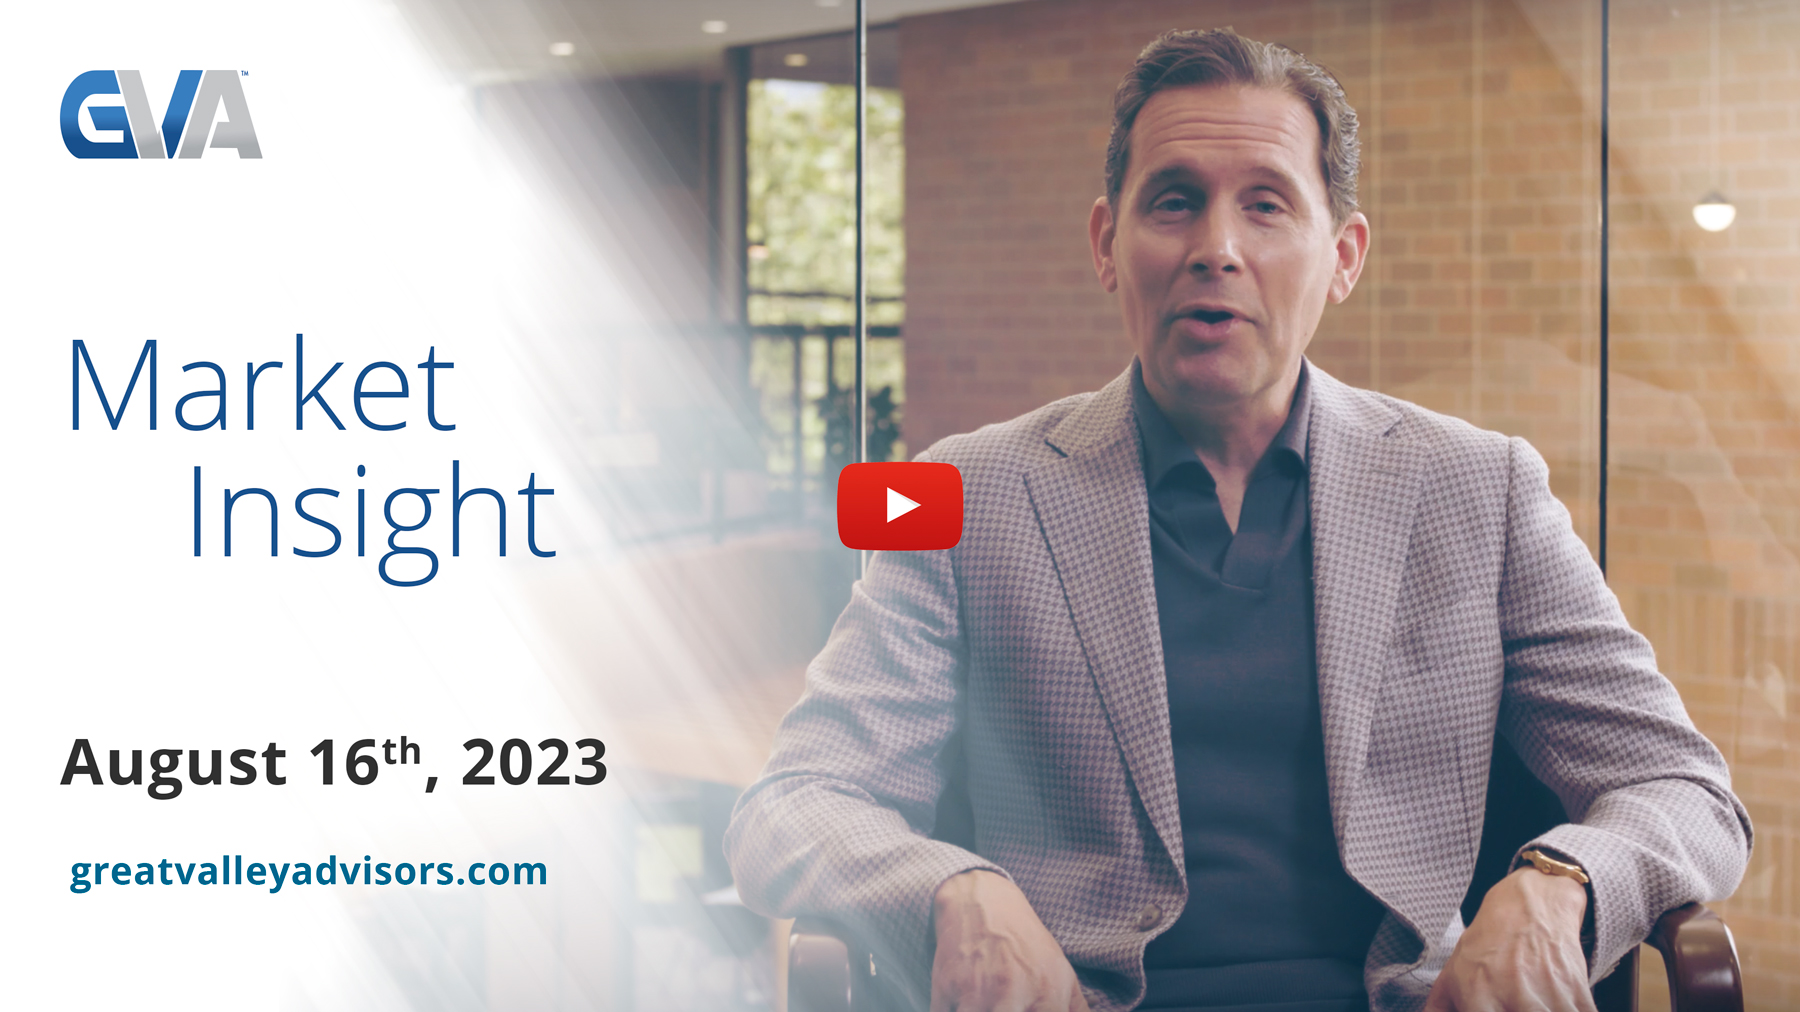 Market Insights with Eric: Episode 7, August 16th, 2023